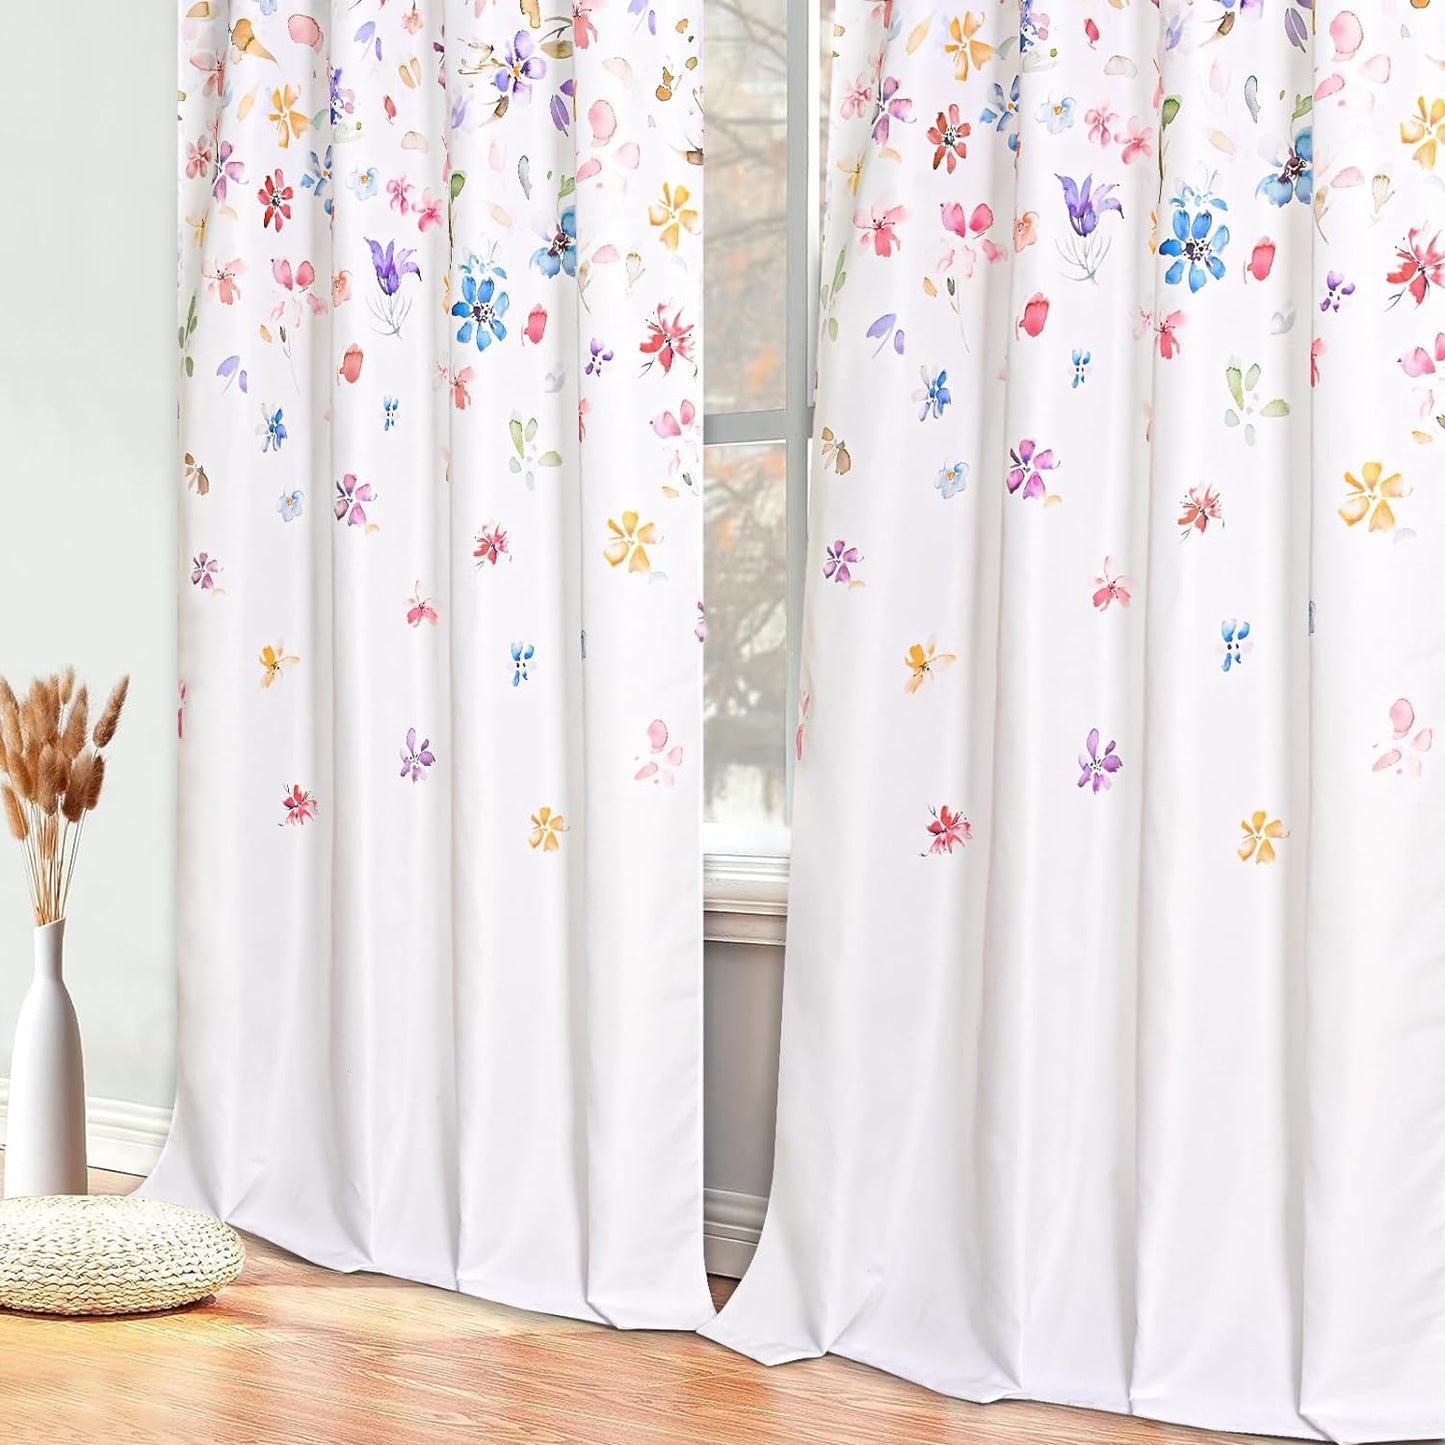 FRAMICS Floral Window Curtains for Living Room Floral Curtains 63 Inch Length 2 Panels Colorful Flowers Curtains for Bedroom Light Filtering Rod Pocket Curtains, 52" W X 63" L  FRAMICS   